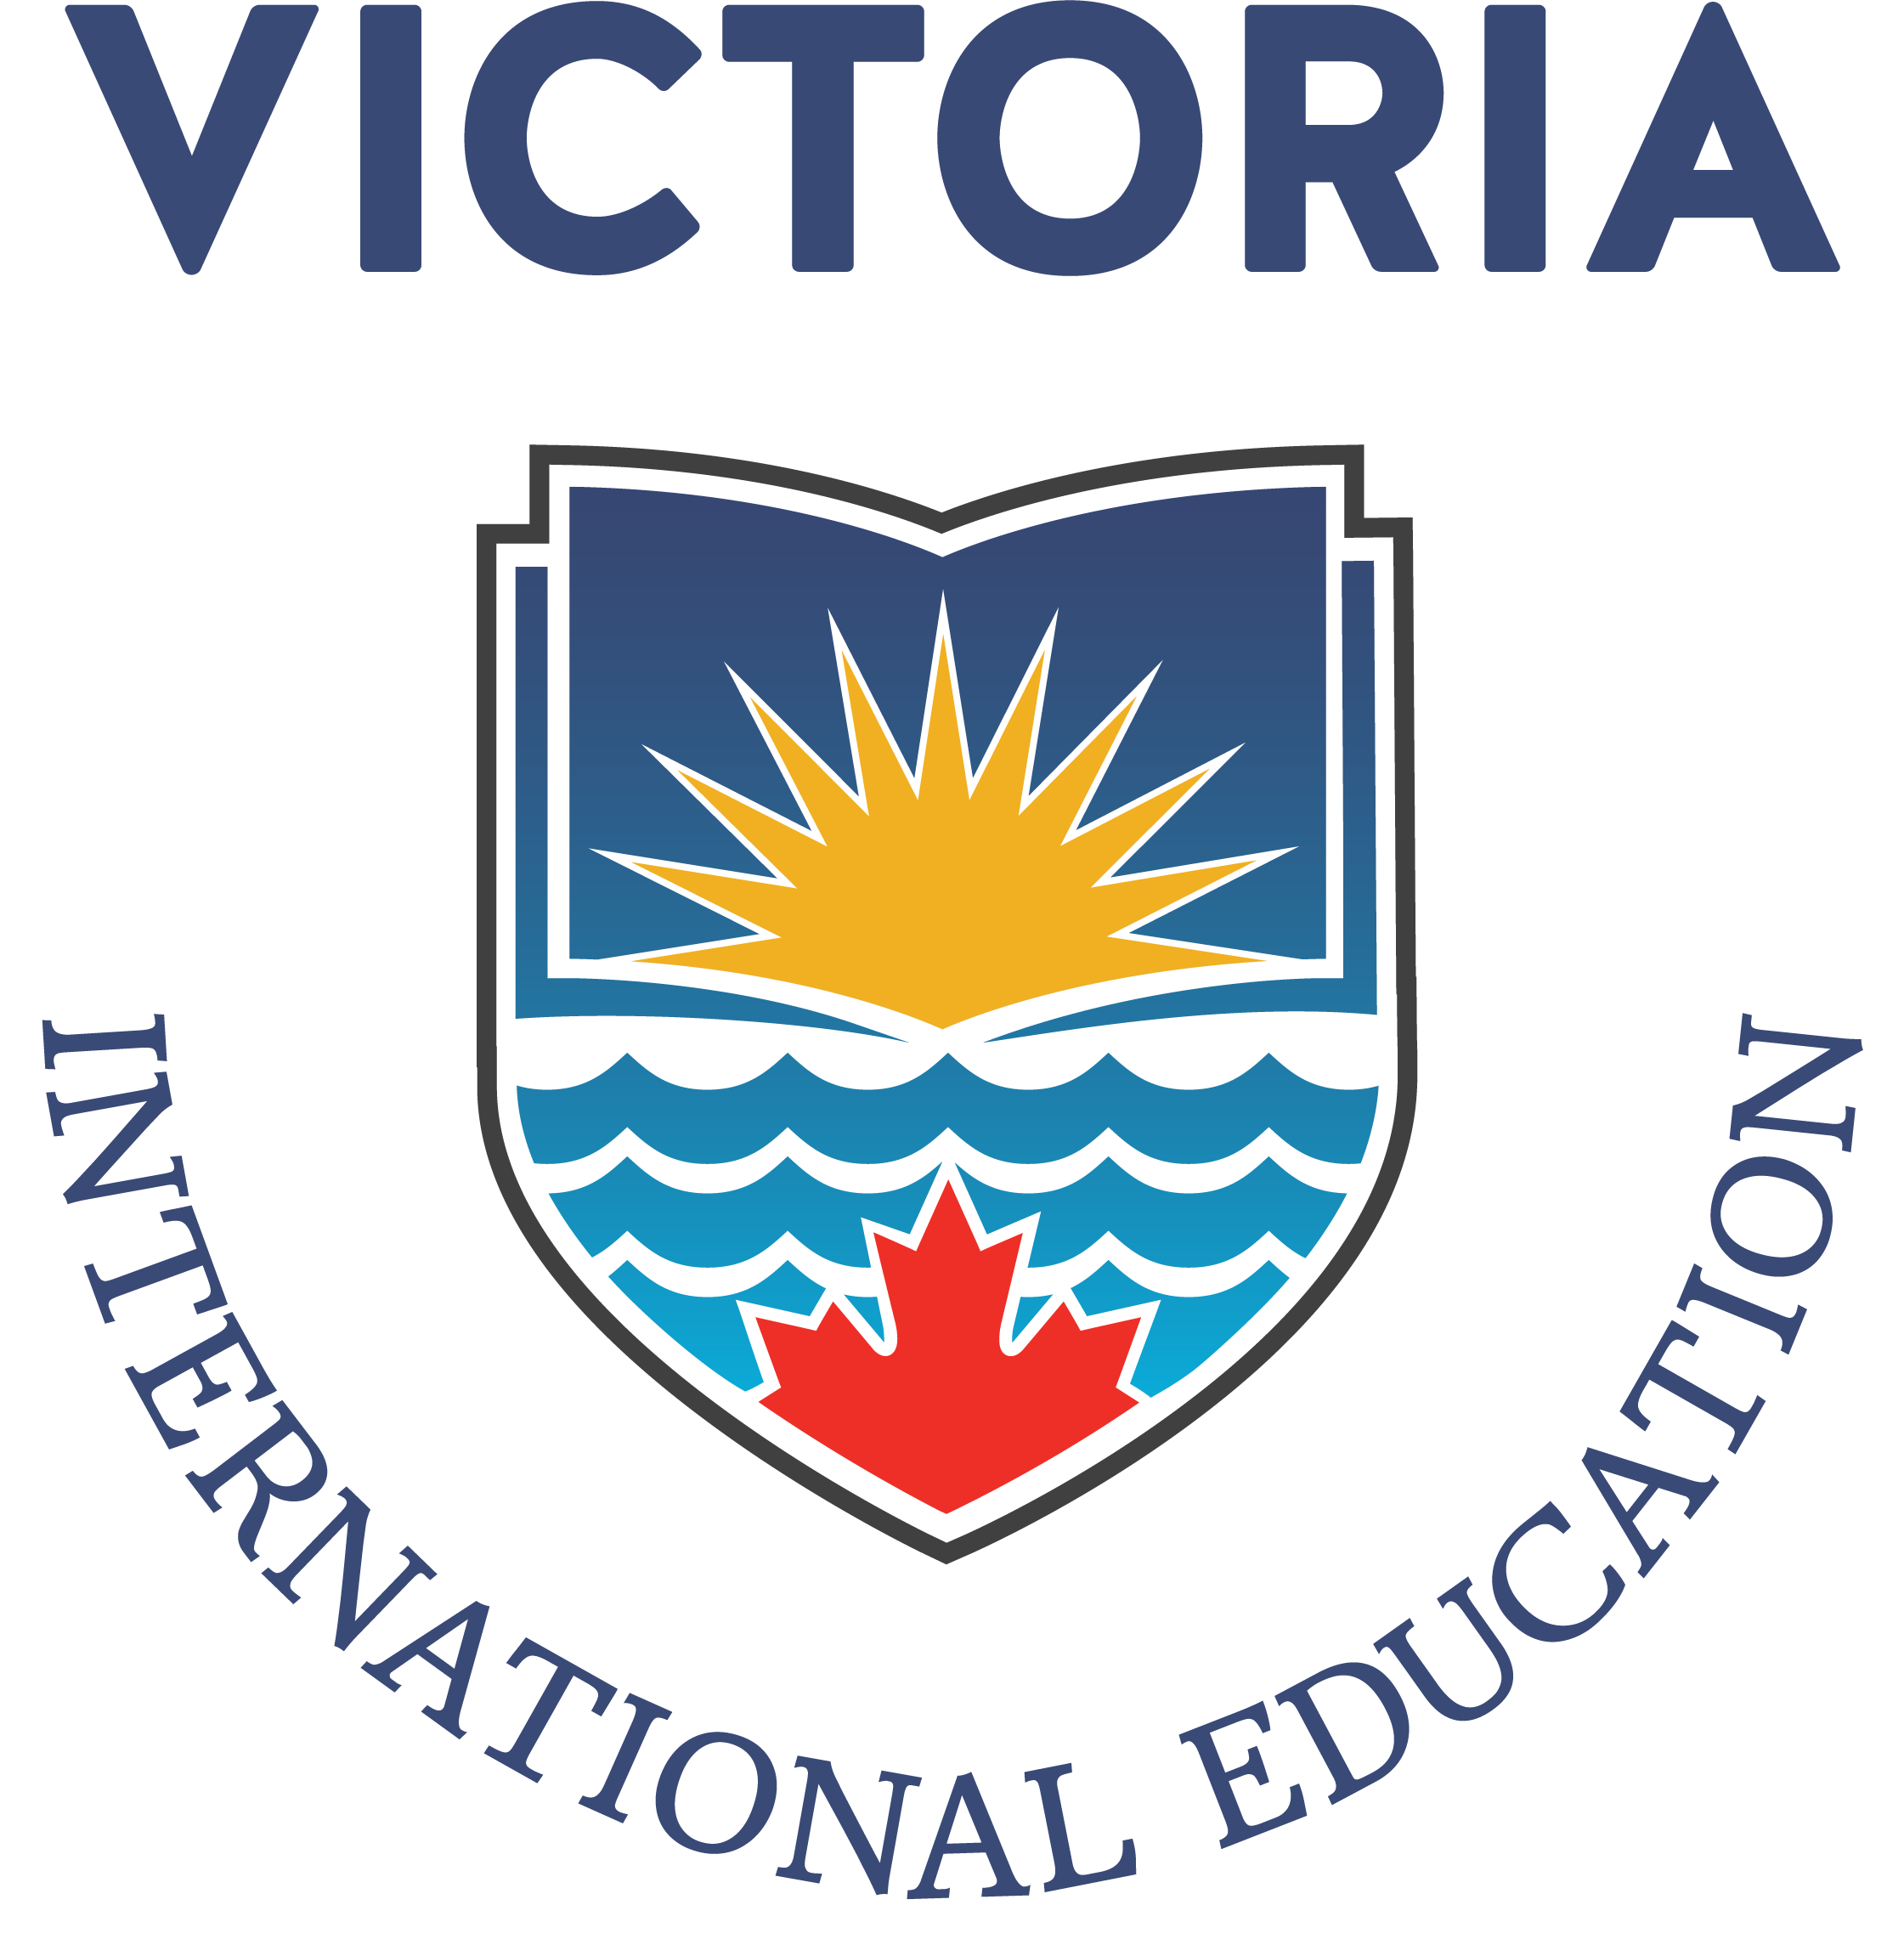 Greater Victoria School District（グレータービクトリア教育委員会）